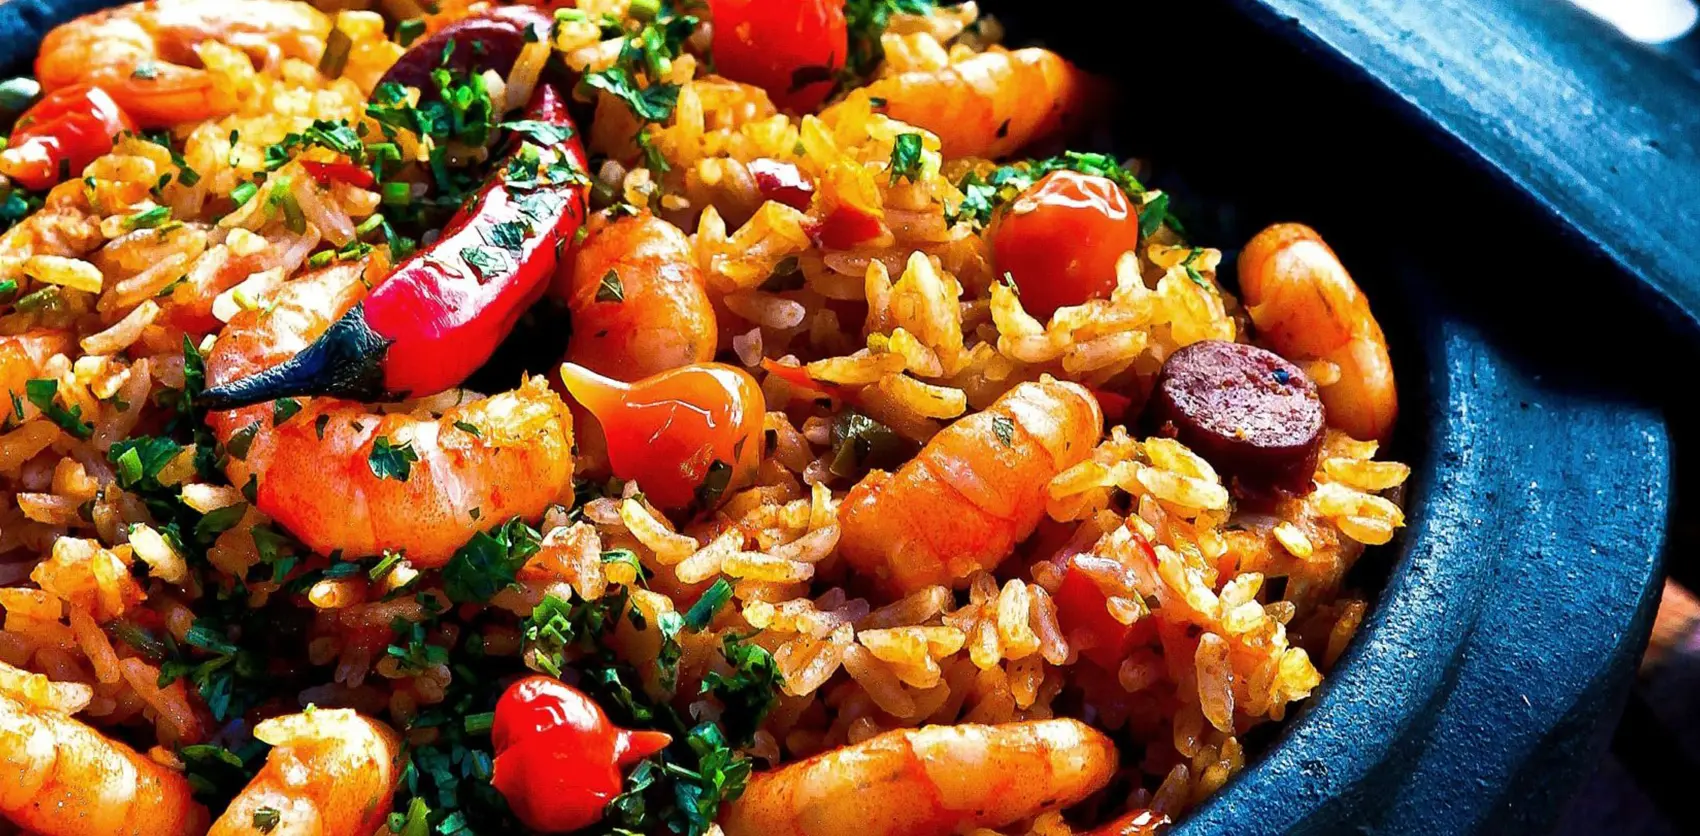 Let’s cook paella